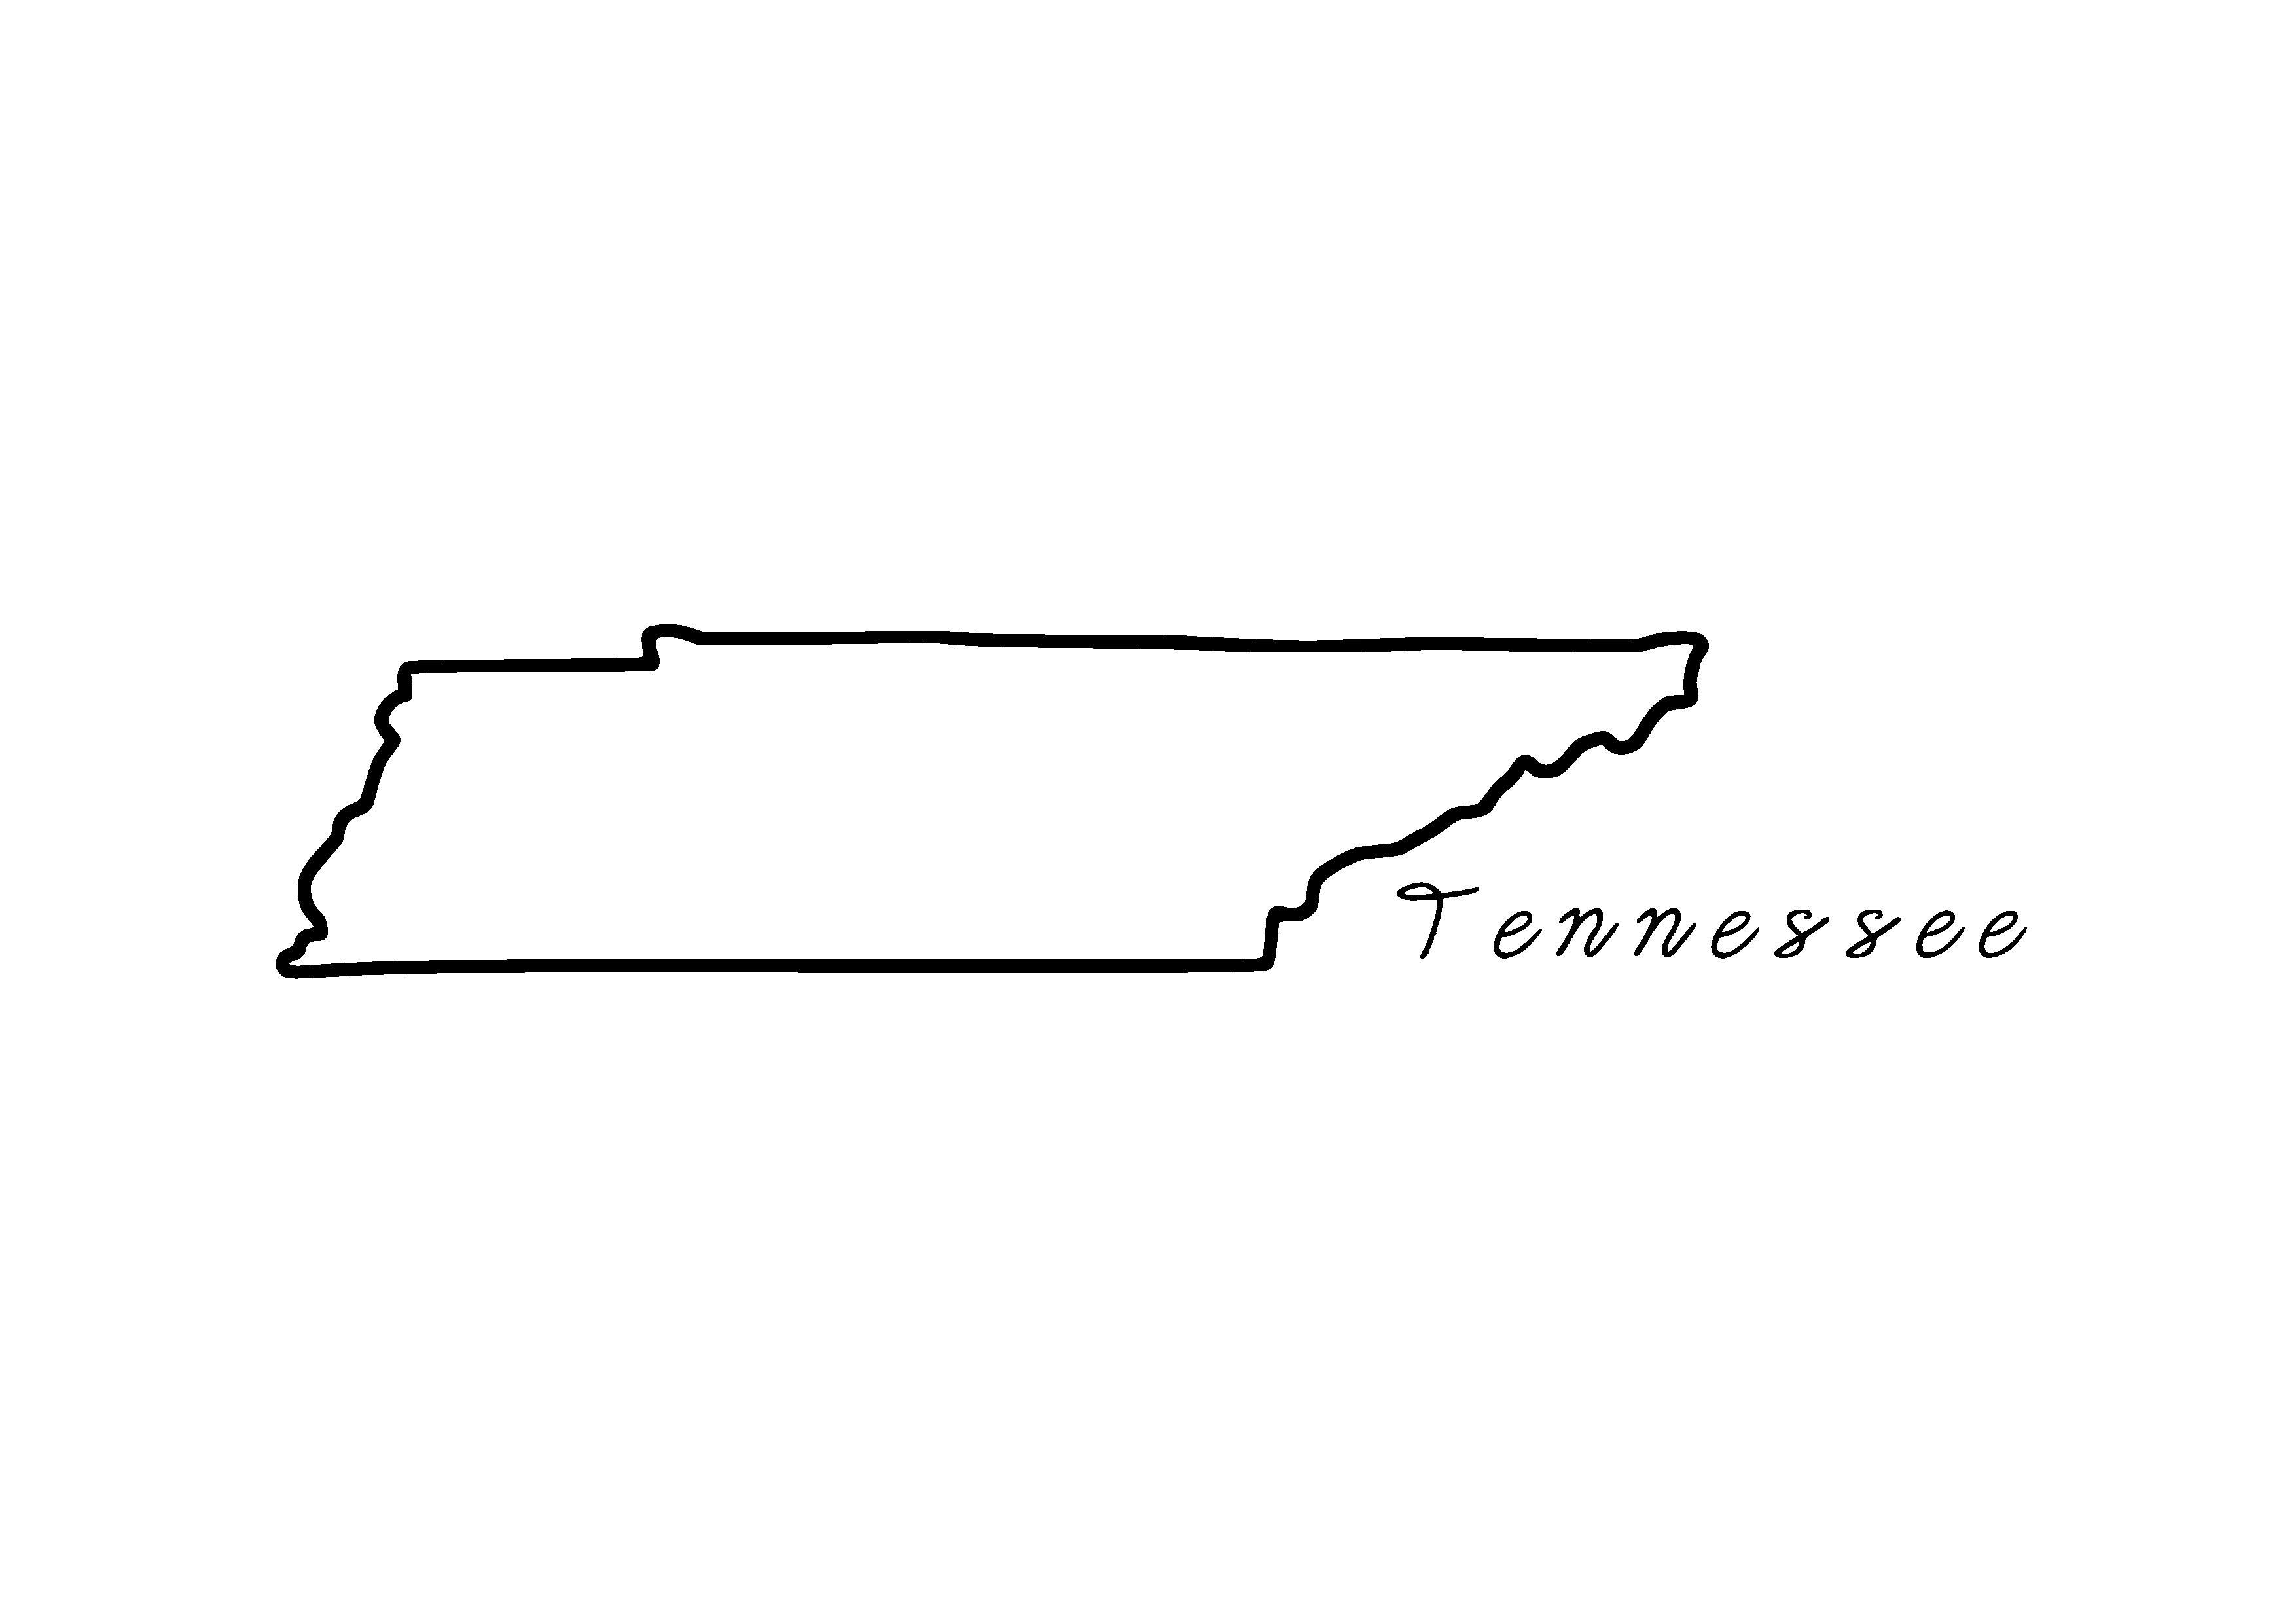 Tennessee Outline Svg Graphic By Filucry · Creative Fabrica